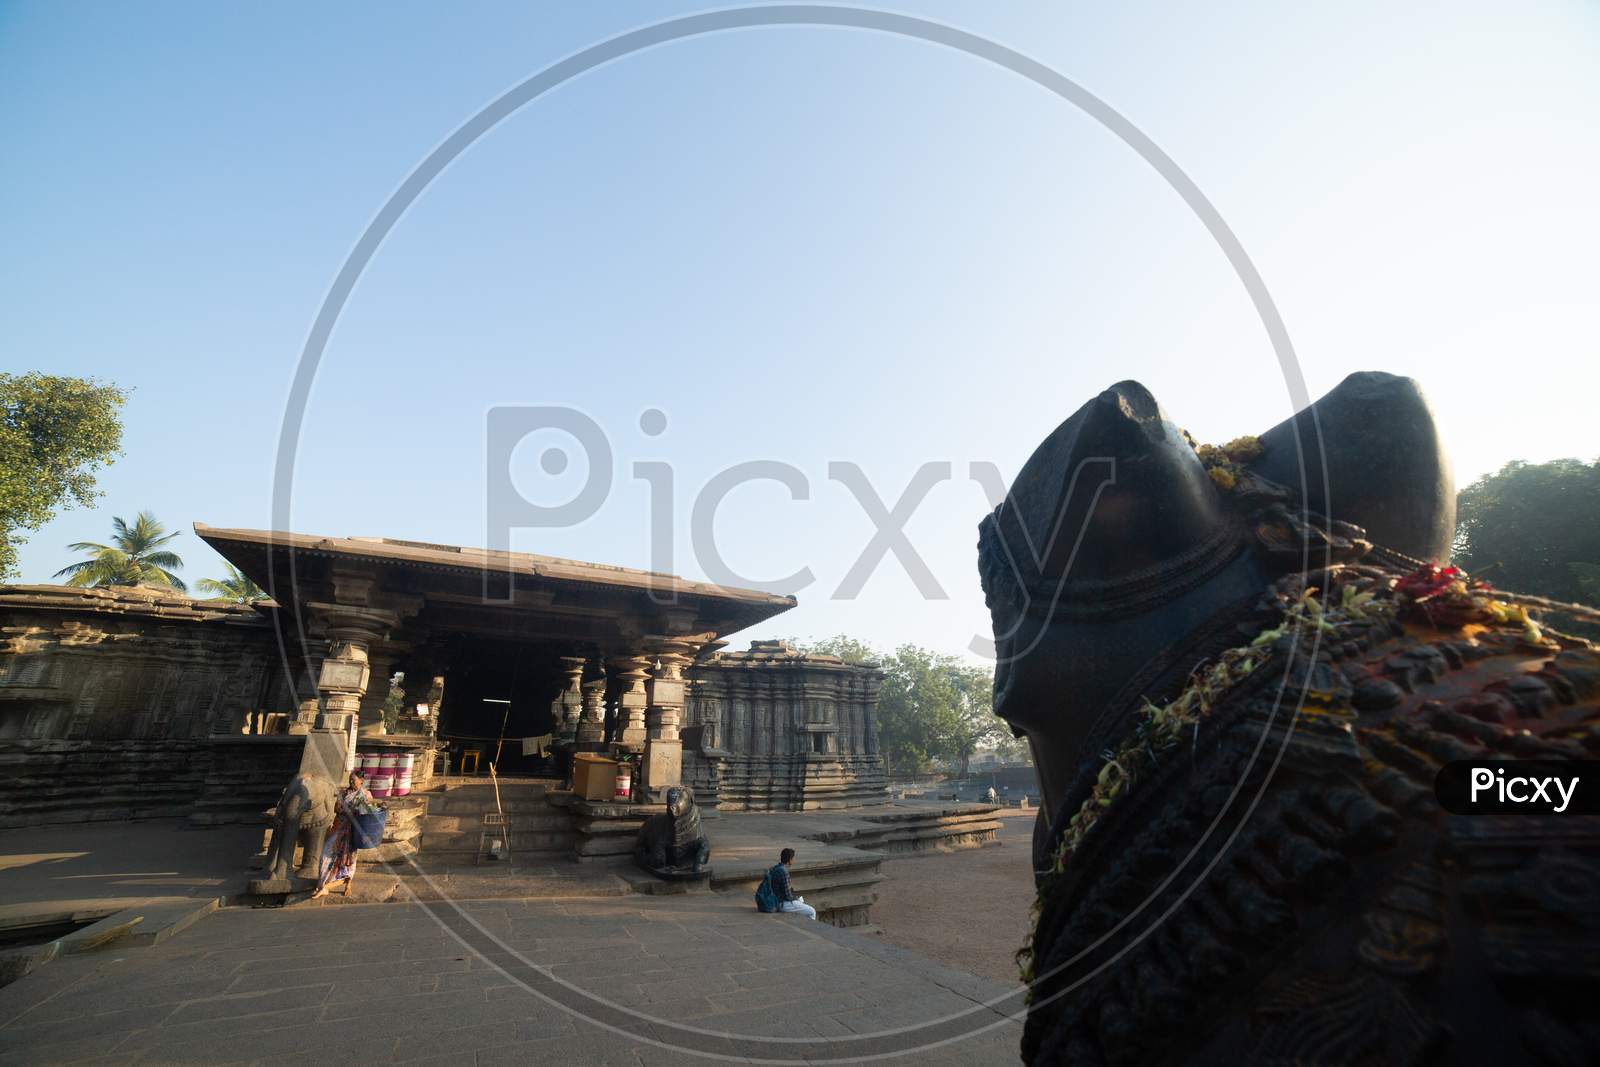 View of Thousand Pillar Temple during the morning light